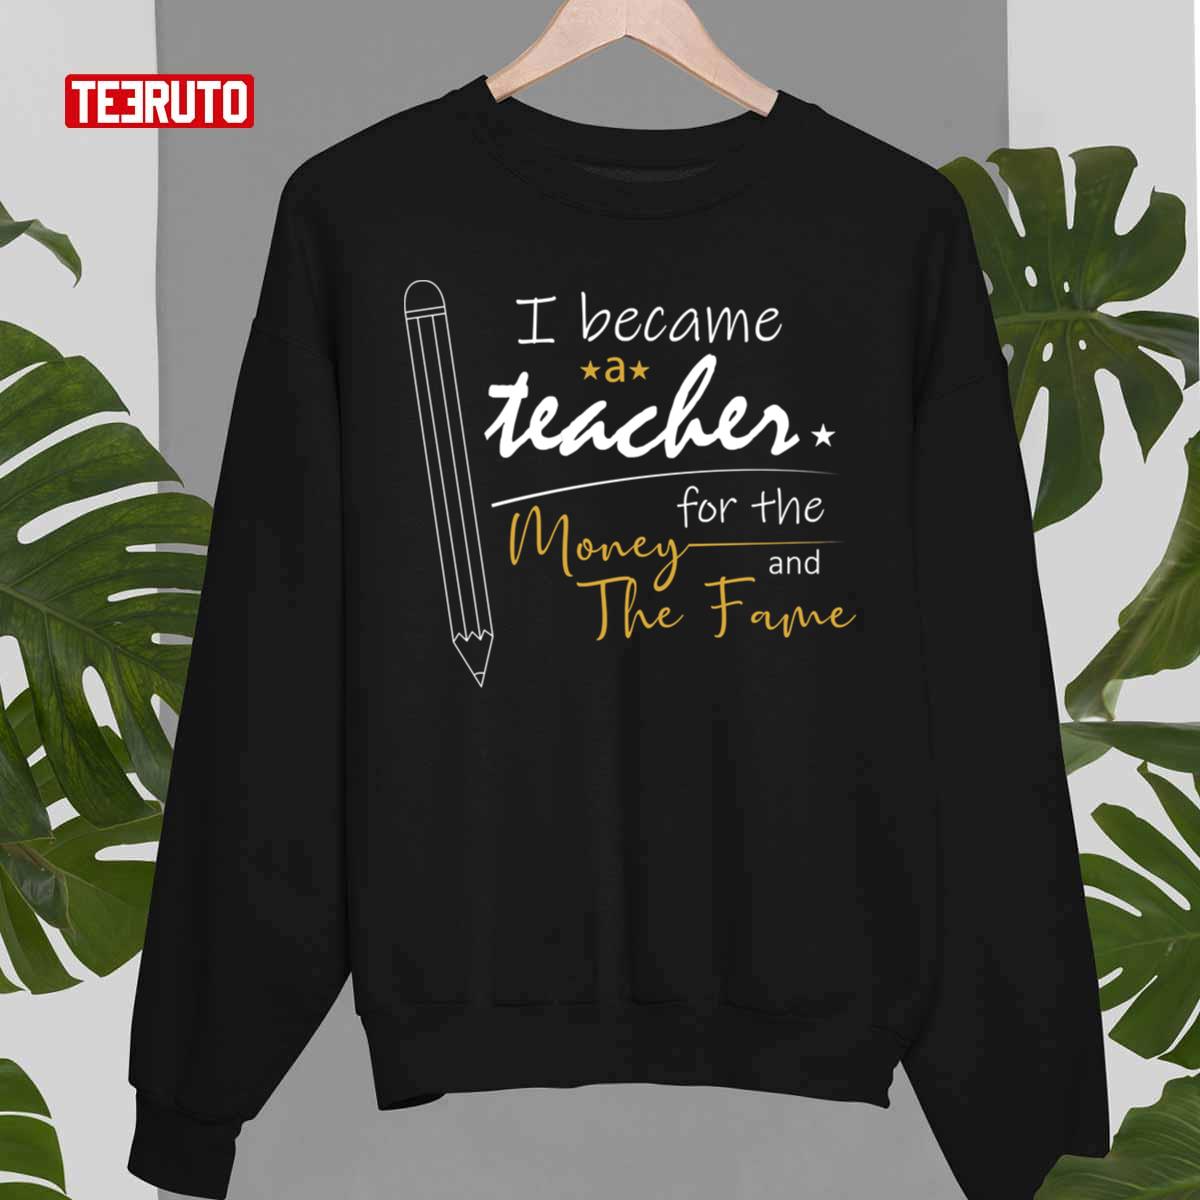 I Became A Teacher For The Money And Fame Unisex T-Shirt